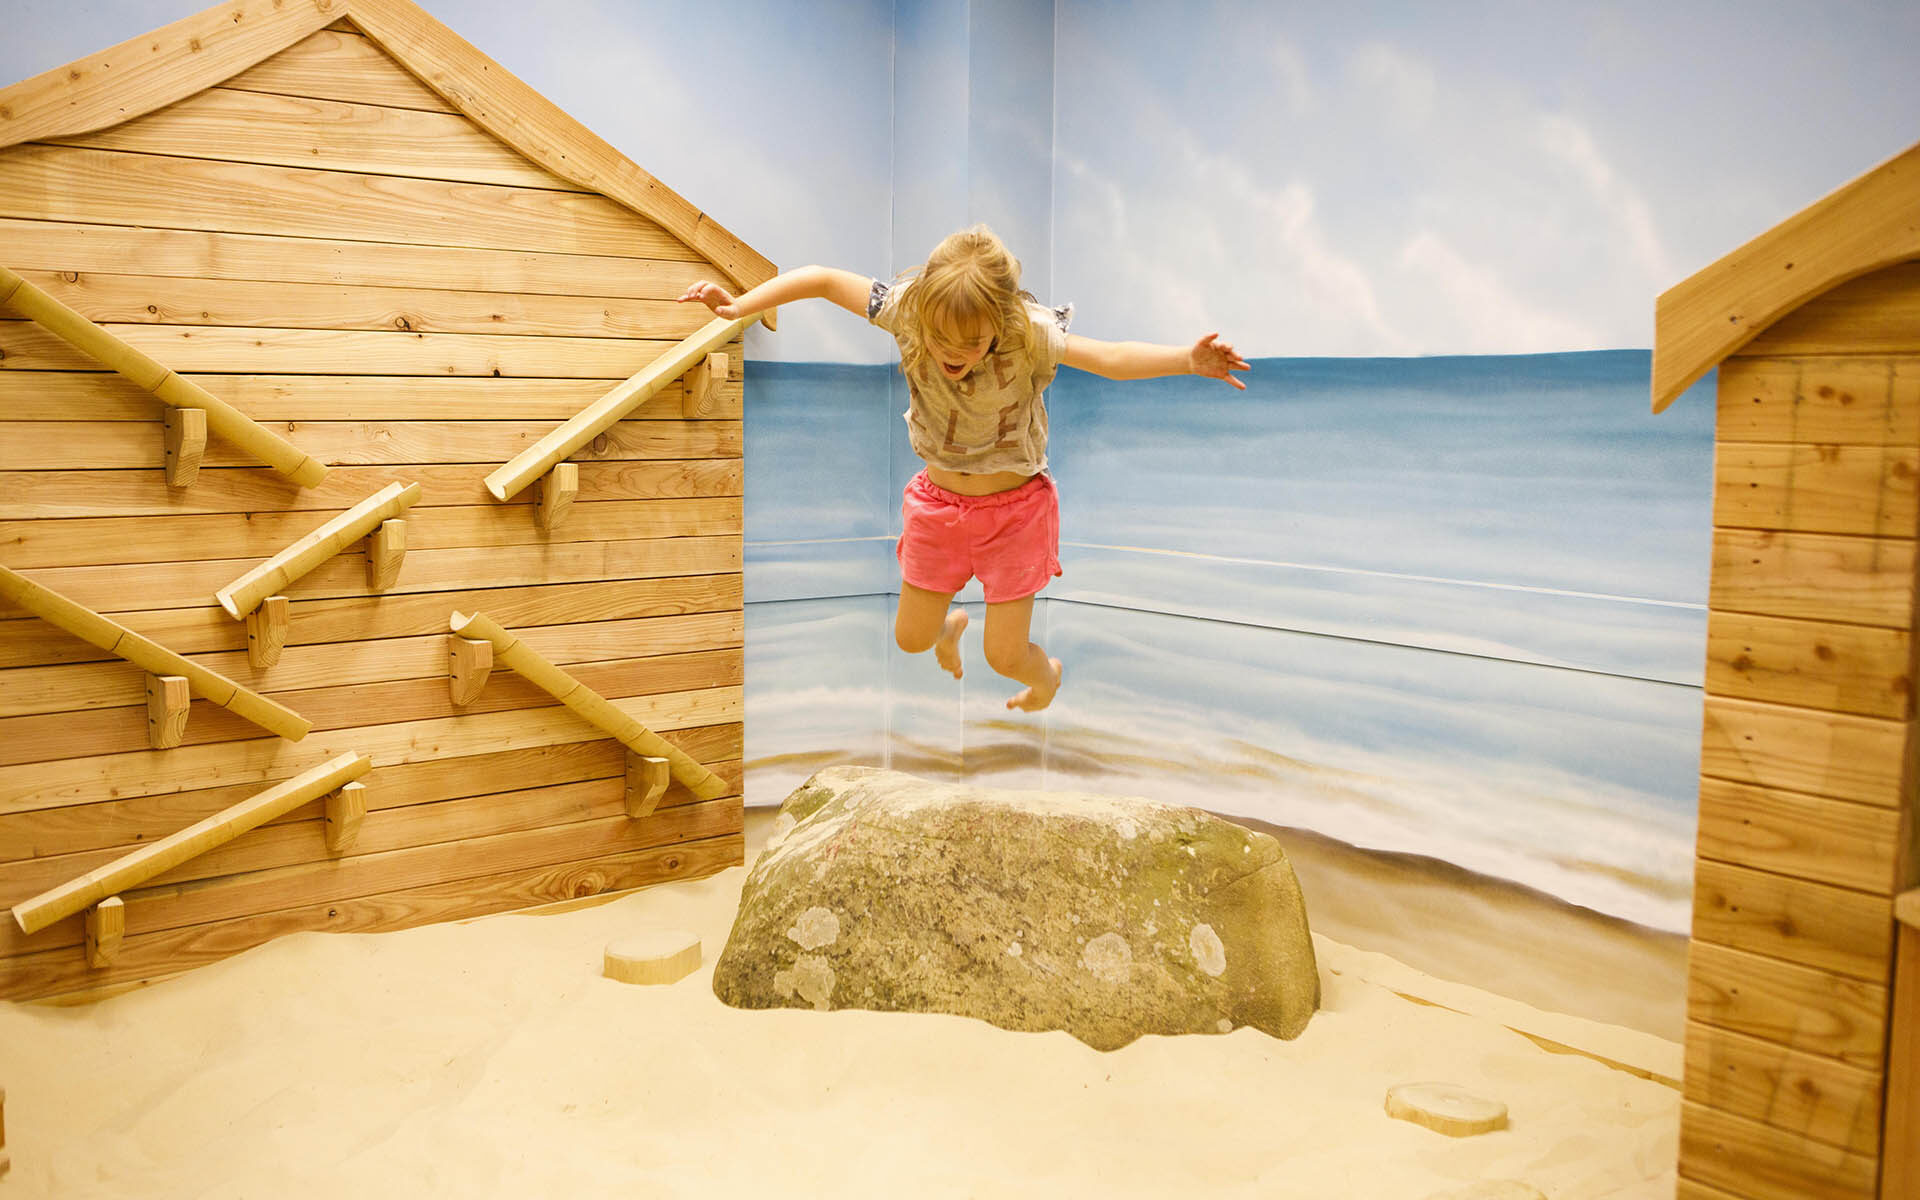 Reimagining soft play: How our indoor play centre encourages naturally curious play